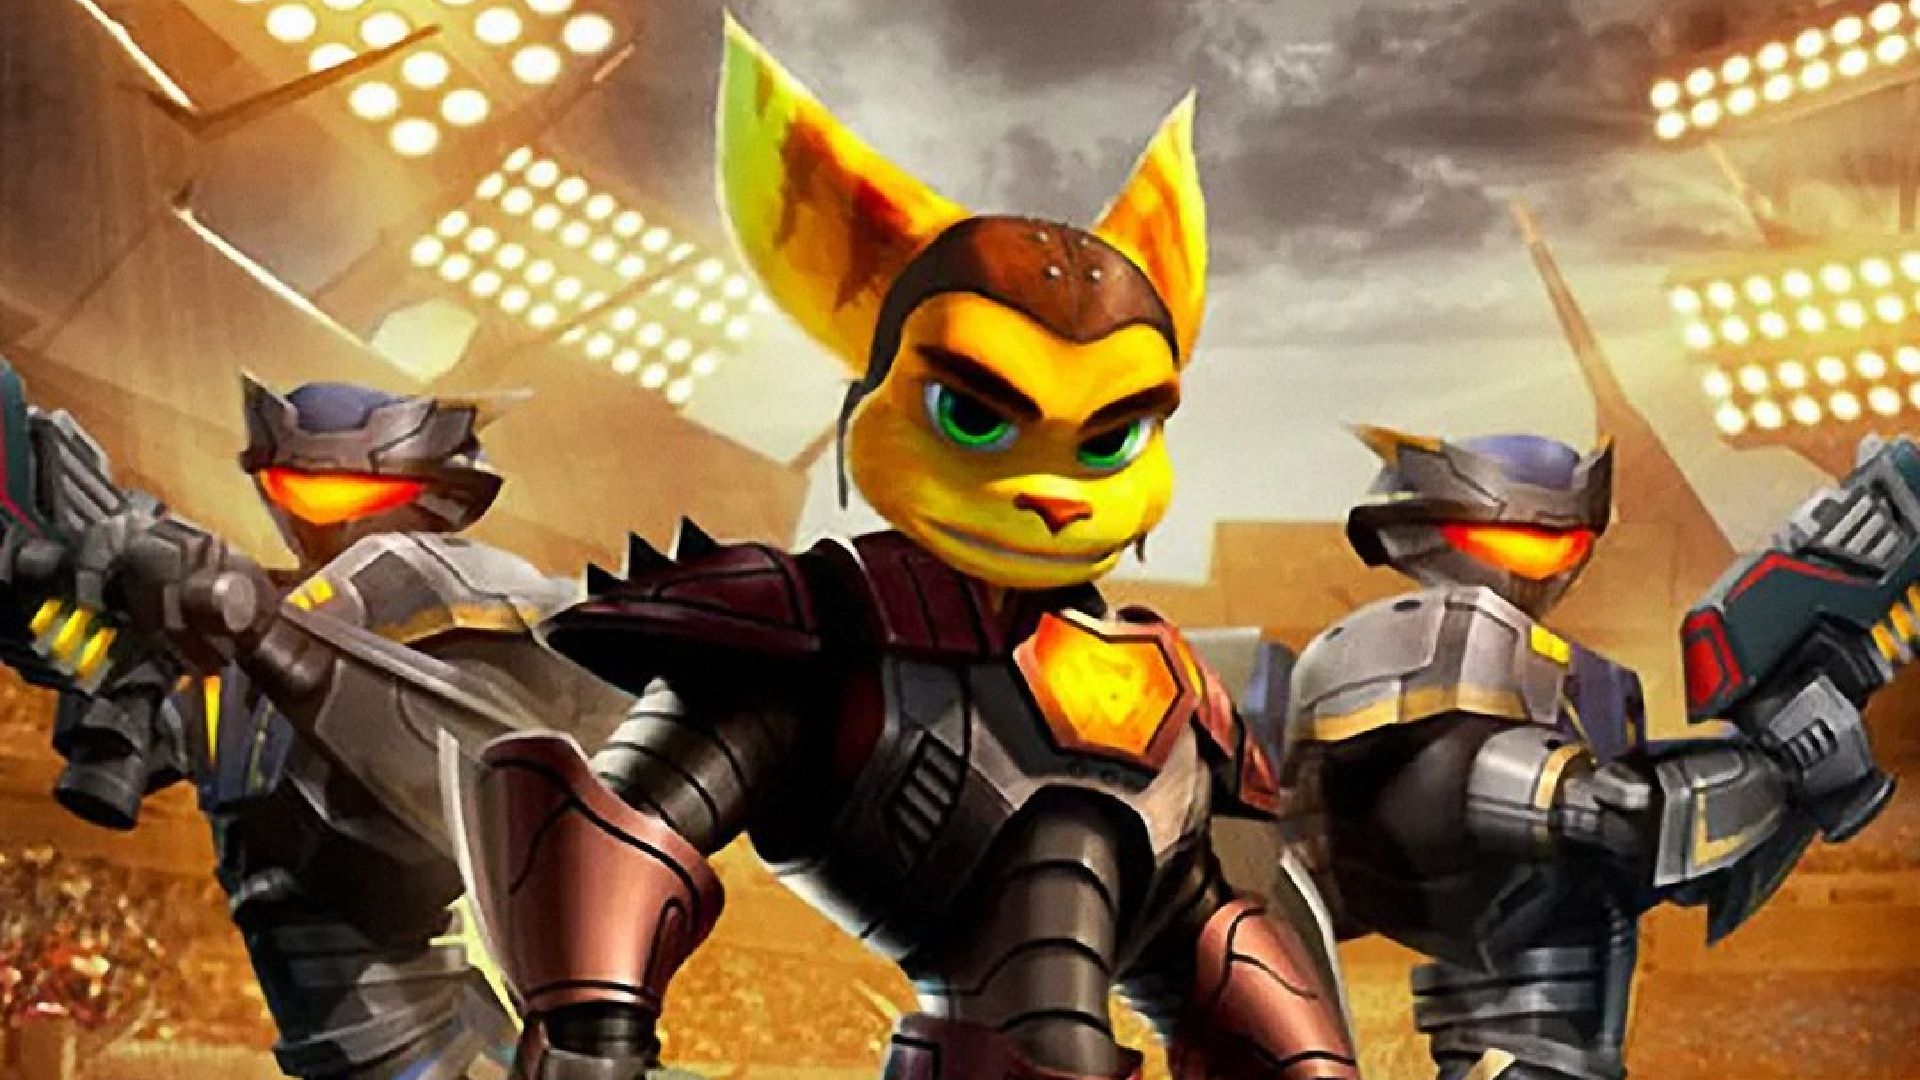 PS Plus Premium Gets Five Ratchet & Clank Games on 15th November